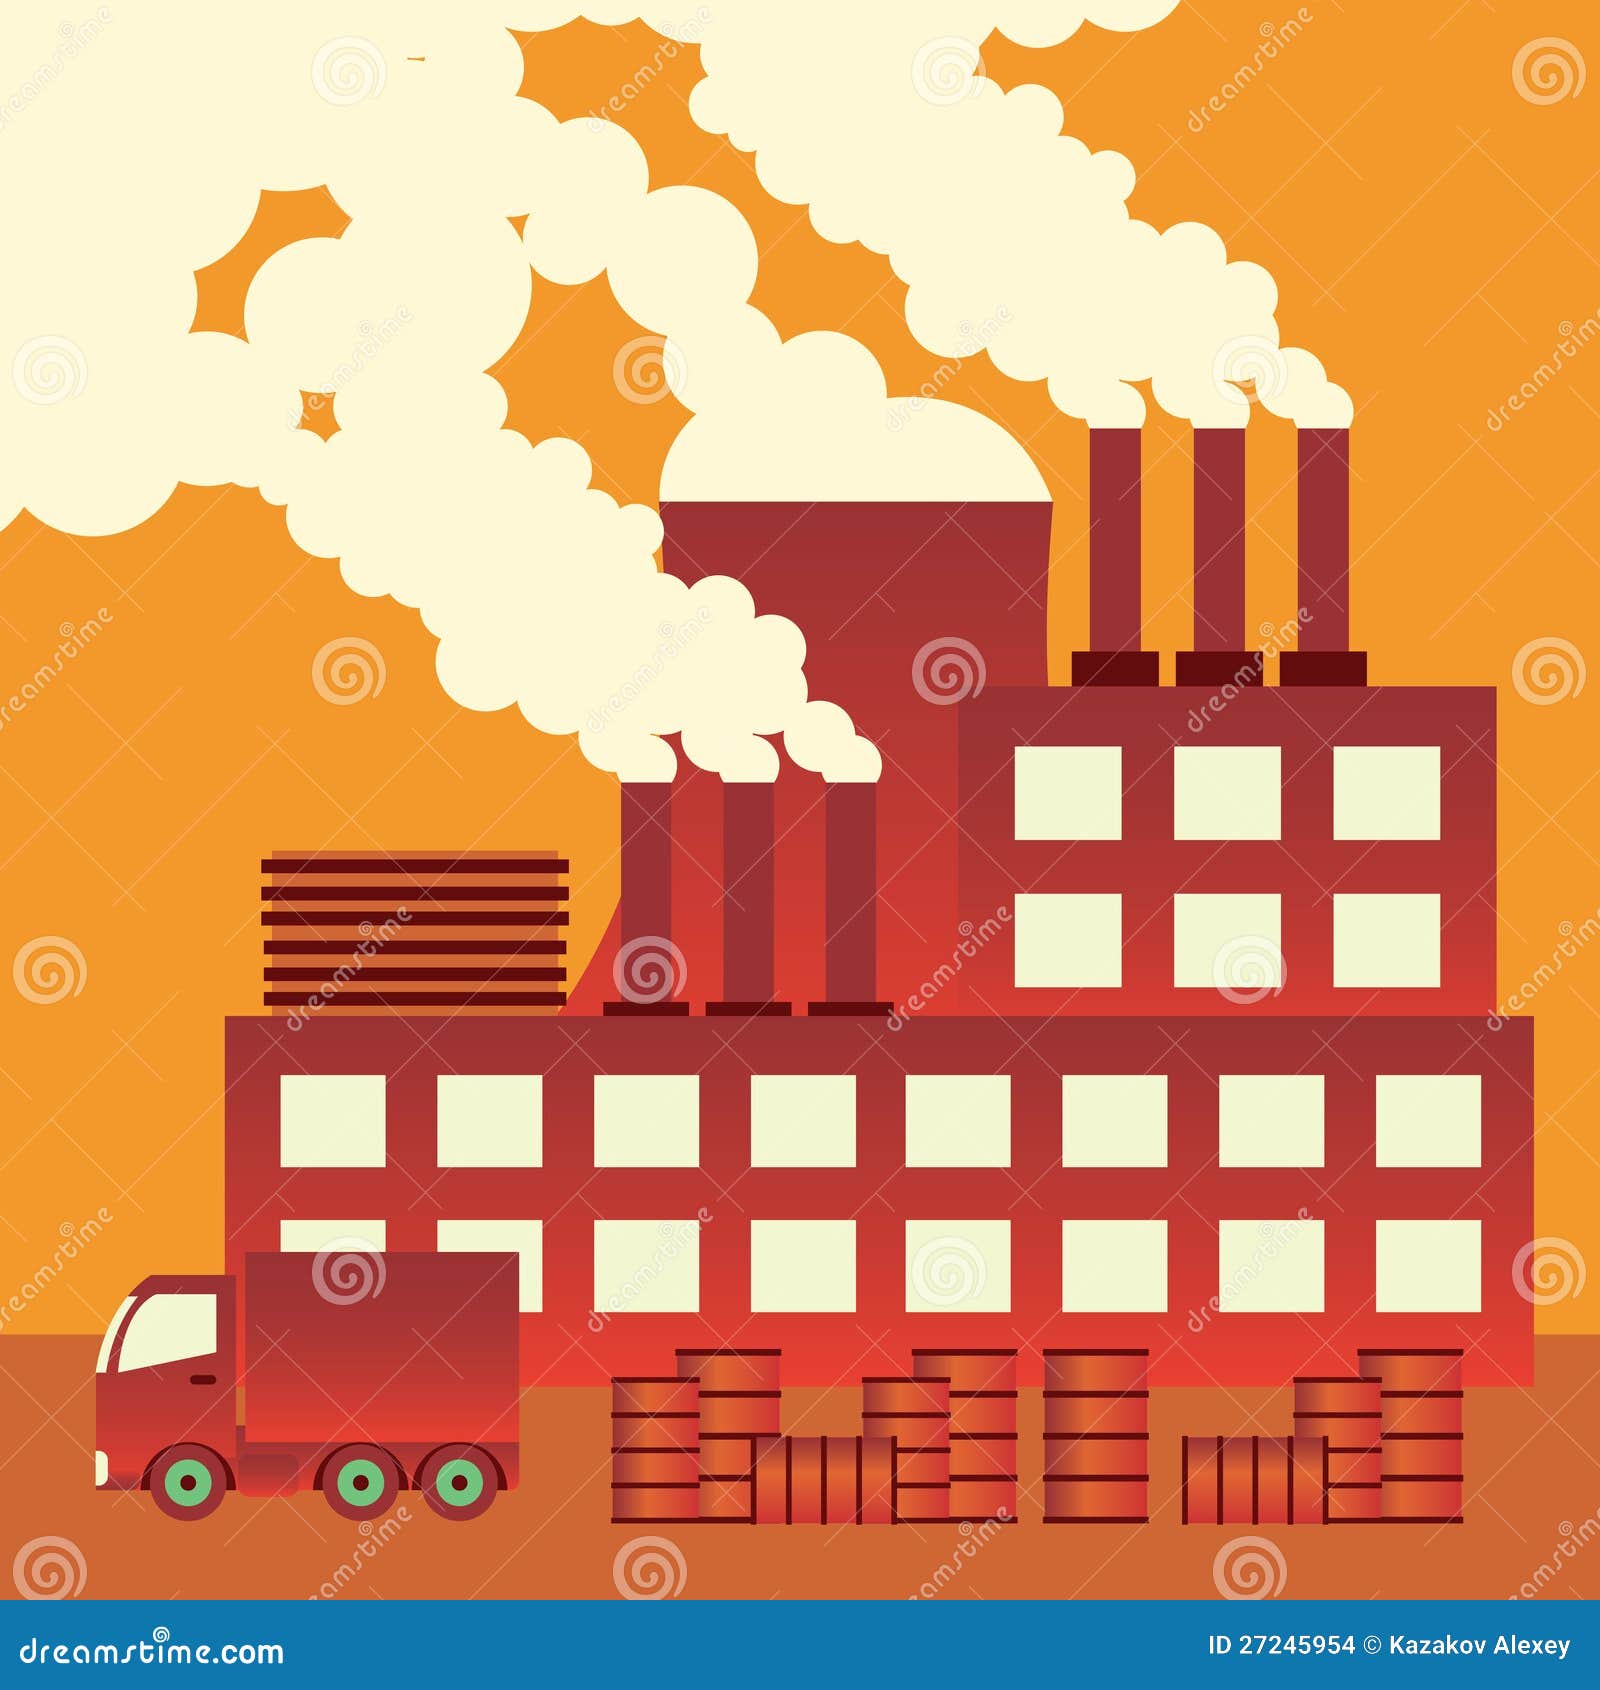 industrial pollution clipart - photo #34